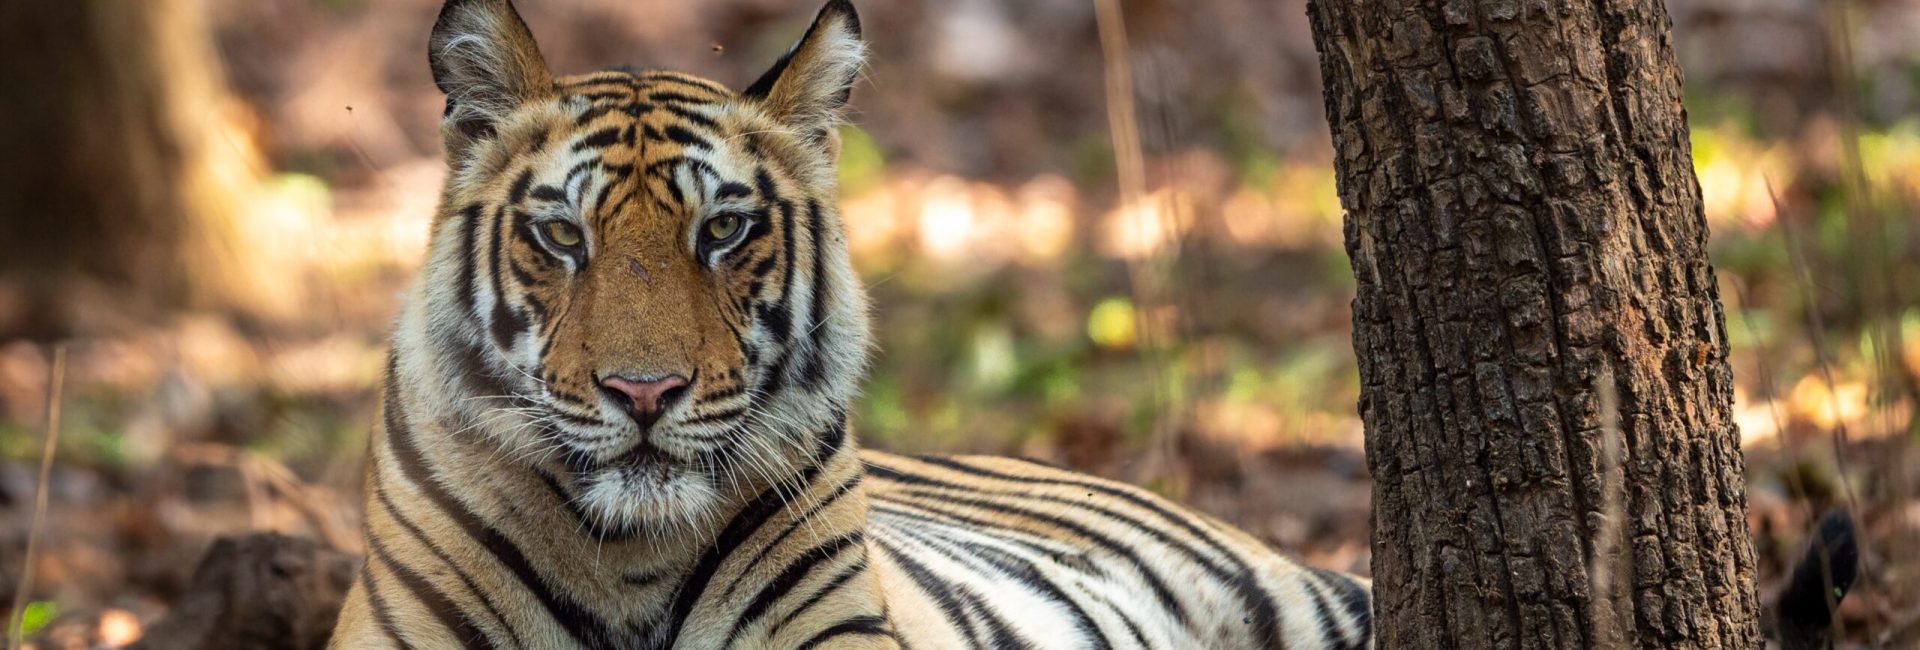 Indian,Wild,Royal,Bengal,Male,Tiger,Portrait,Or,Closeup,In